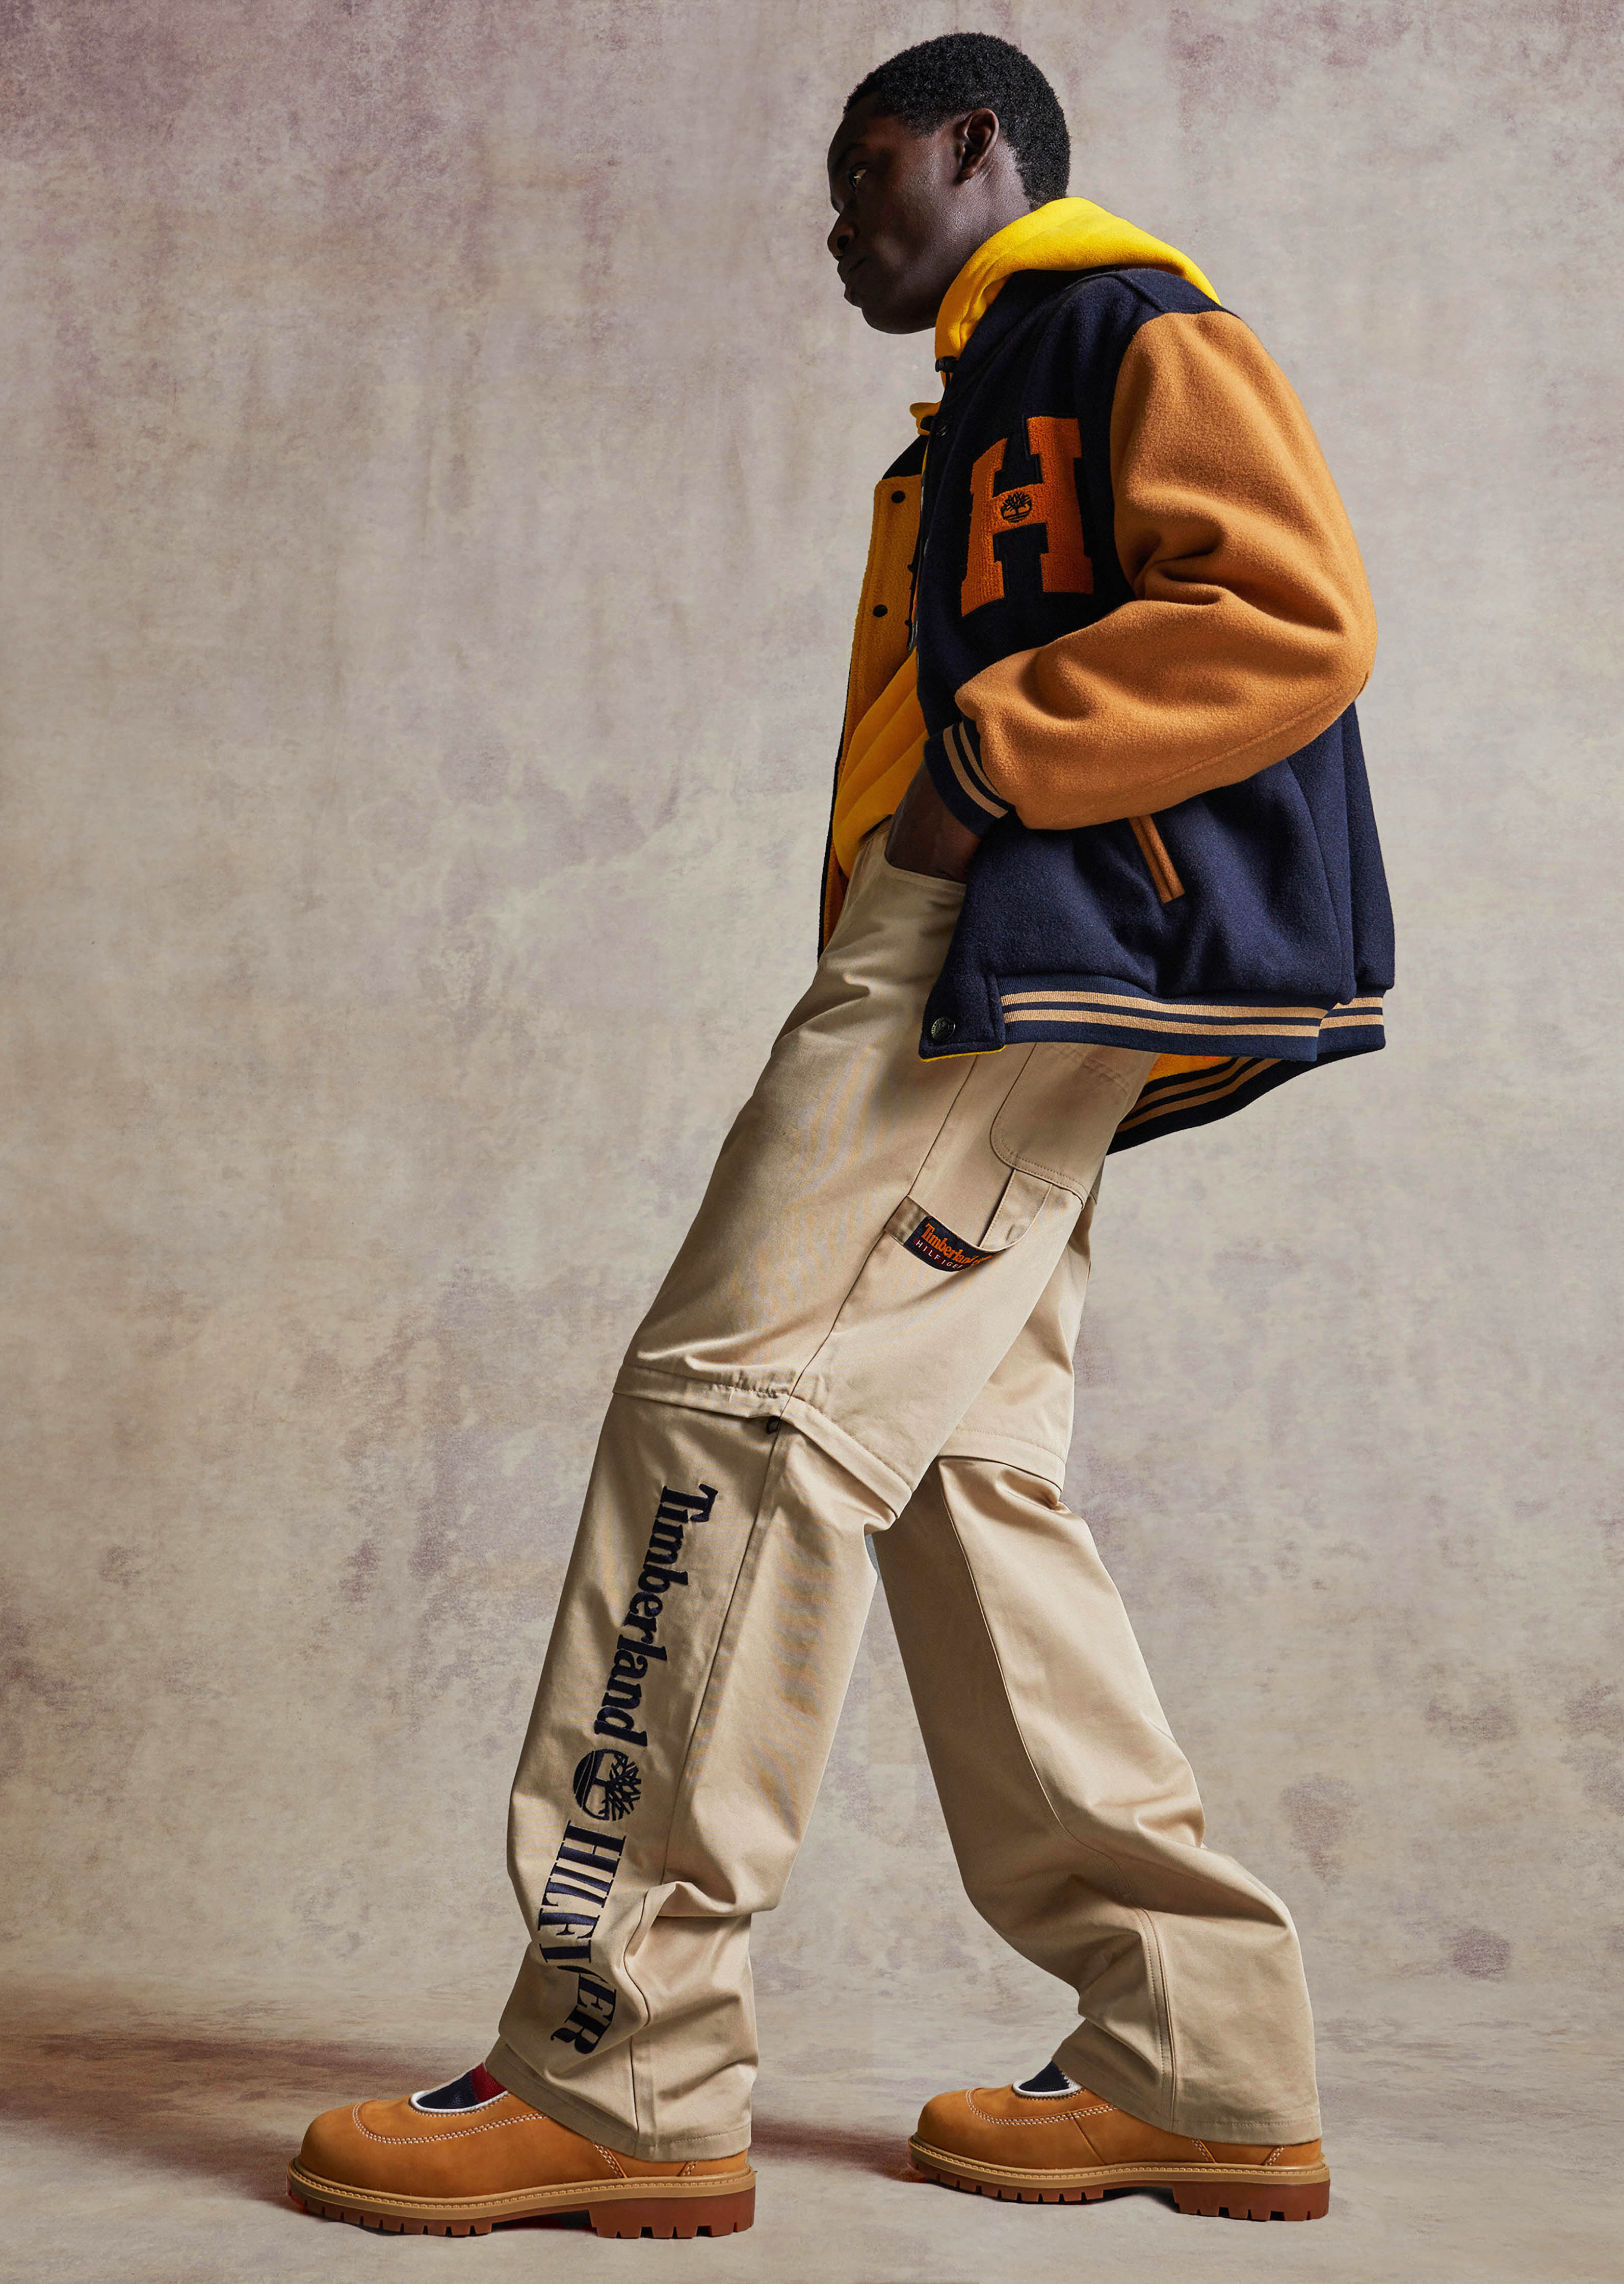 Tommy Hilfiger and Timberland drop part two of their collaboration